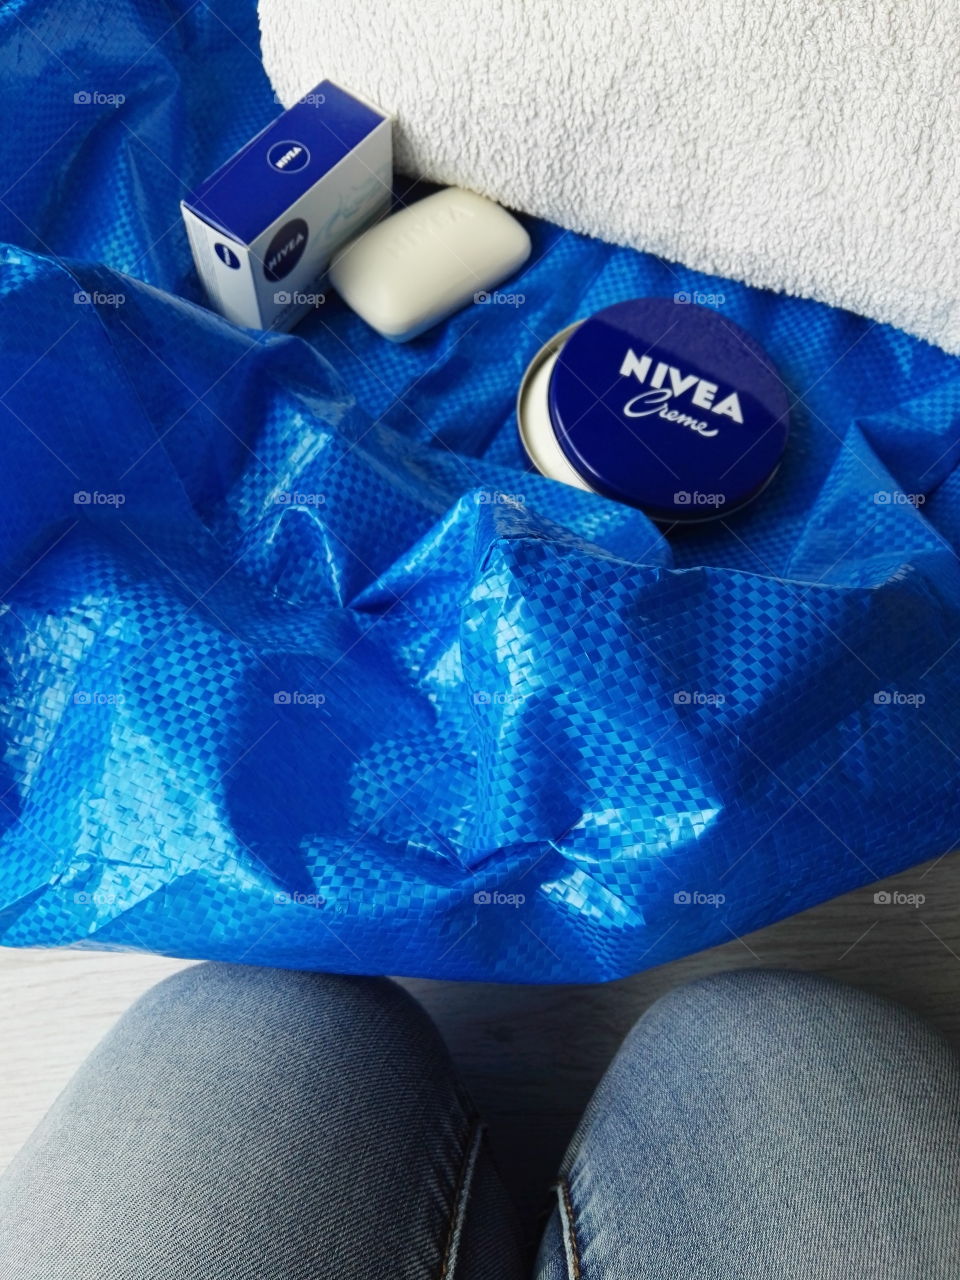 packing Nivea products in Travel